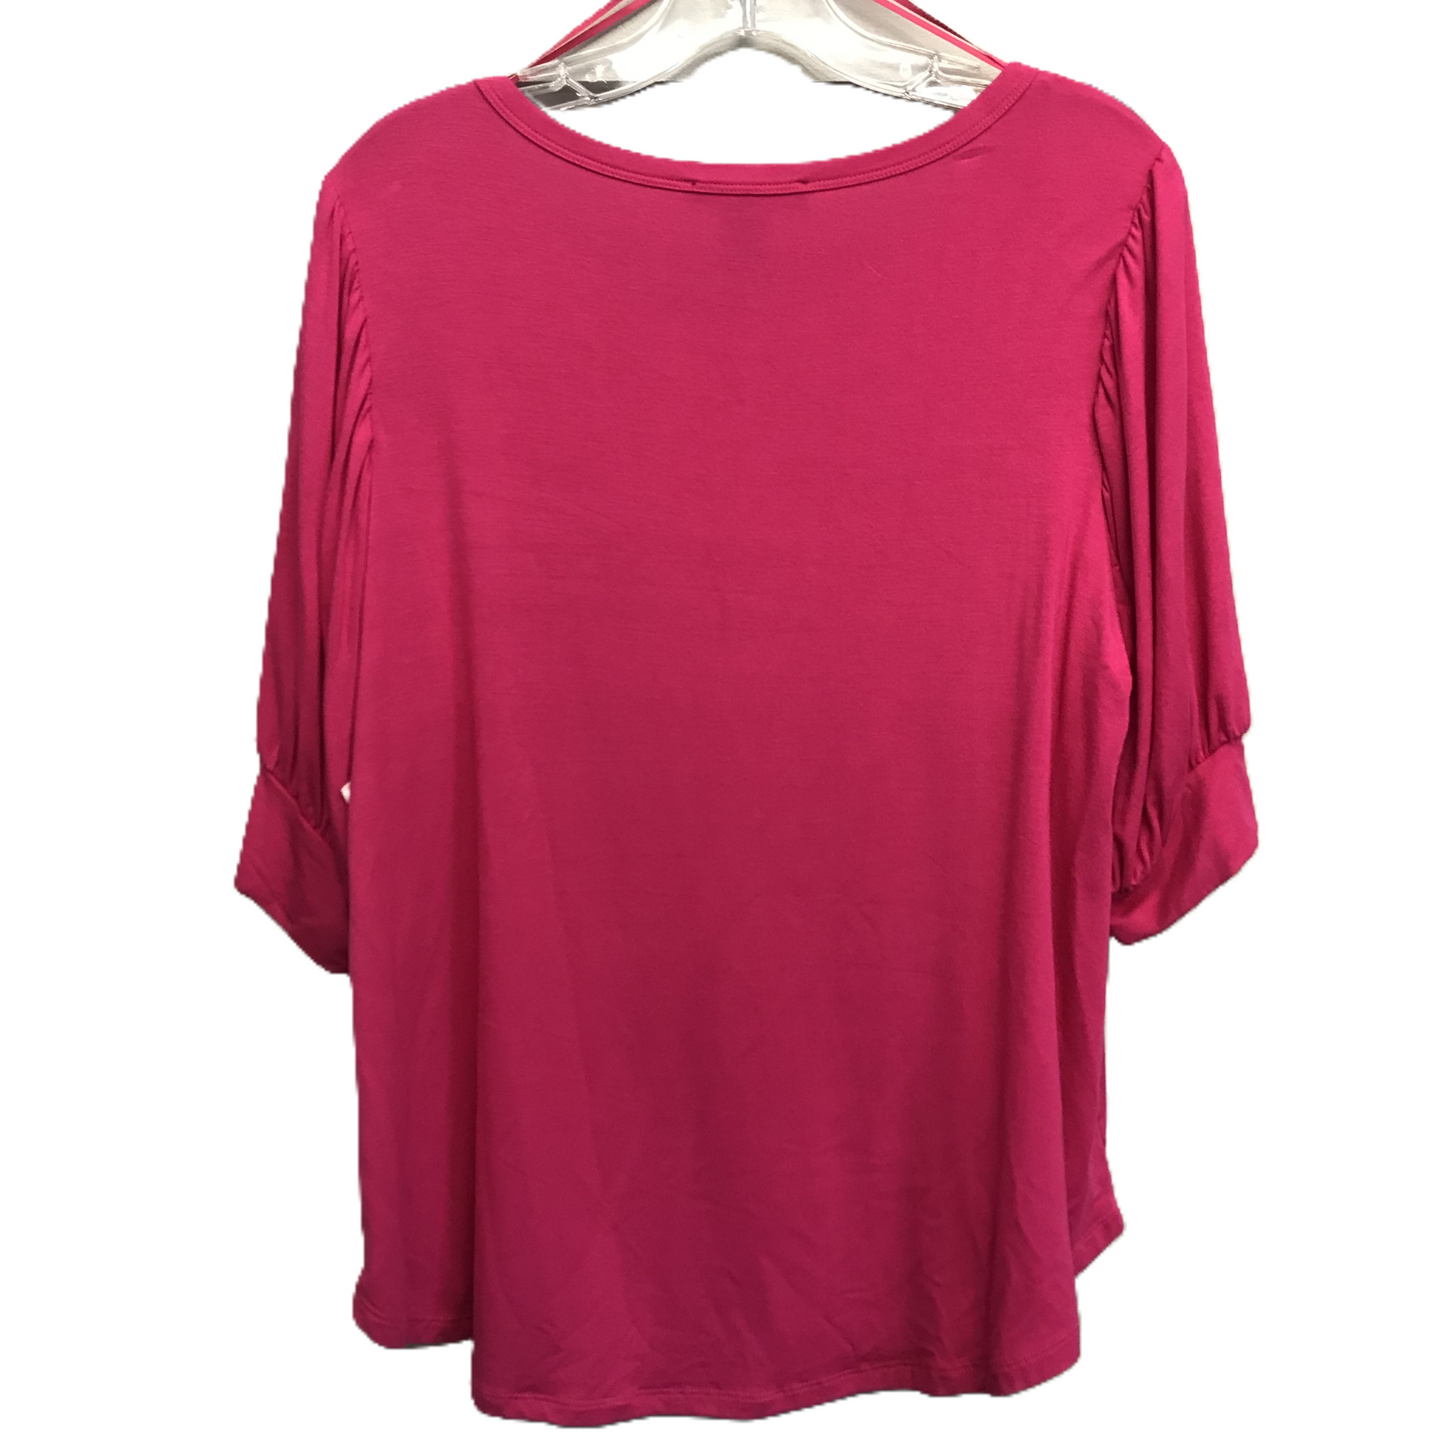 Pink Top Short Sleeve Basic By Joan Vass, Size: L